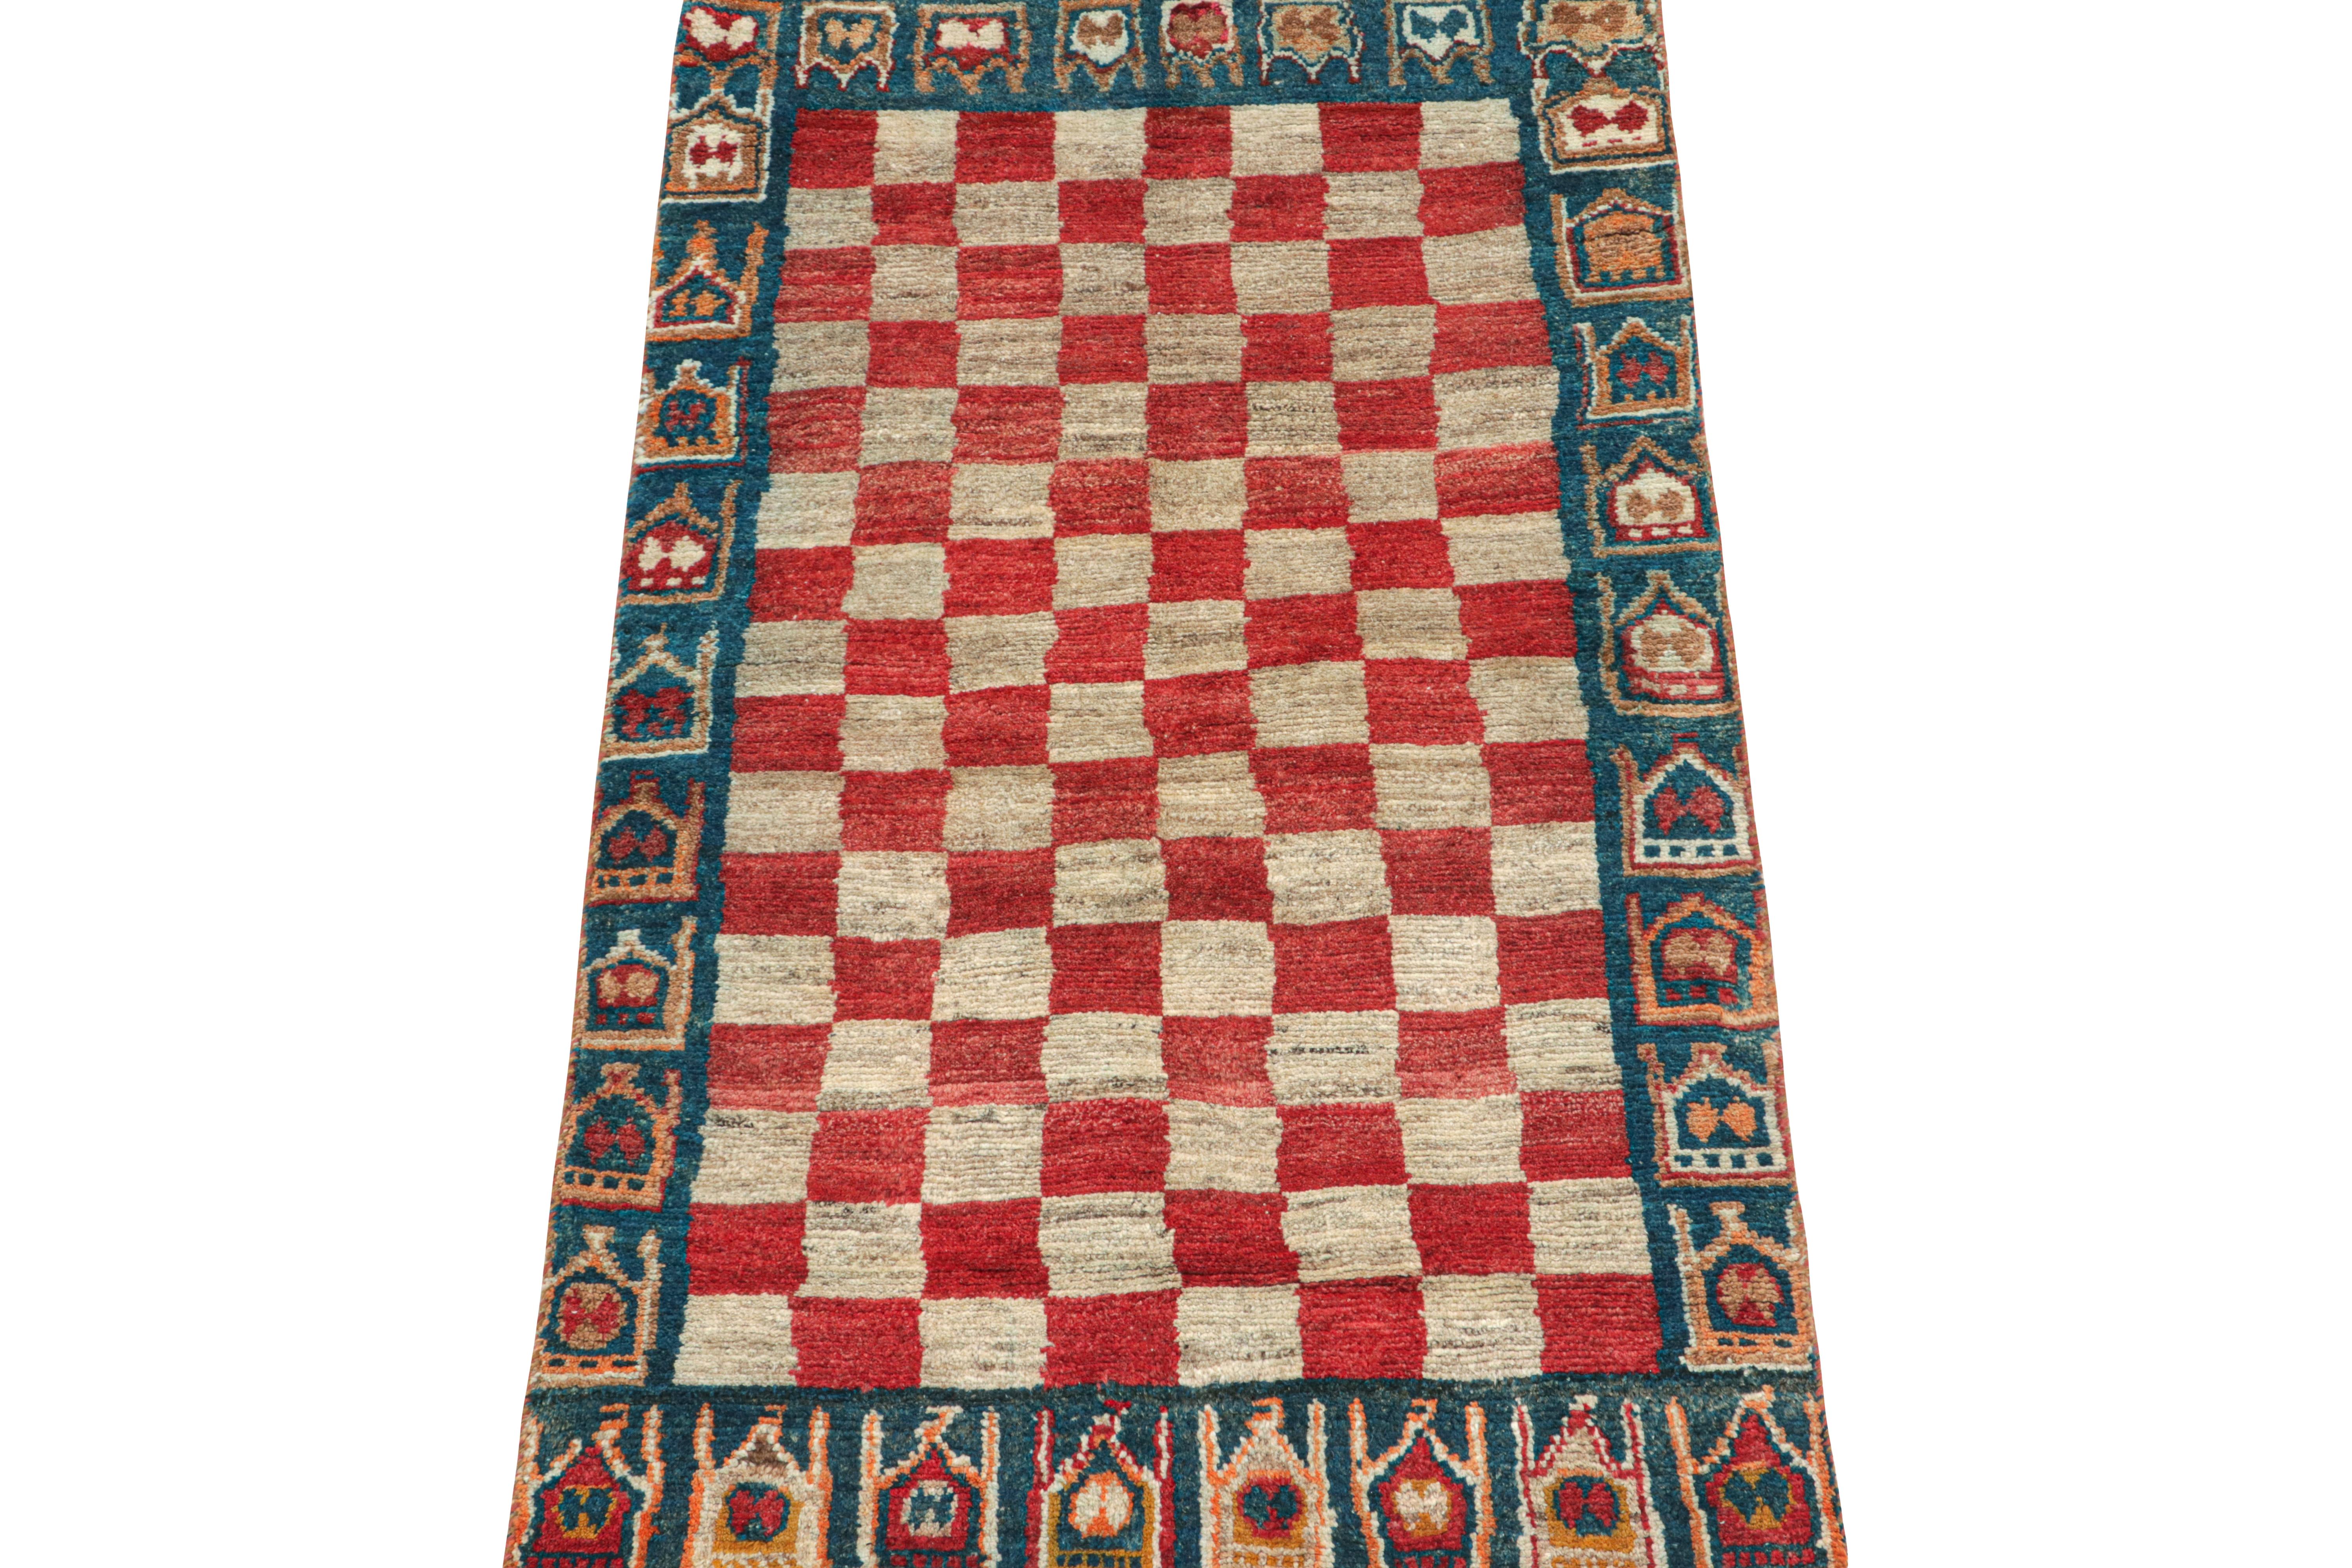 This vintage 3x6 Persian runner is a Gabbeh rug that originates from the Qashqai tribe—hand-knotted in wool circa 1950-1960.

Its repeat is a geometric pattern that plays beige and red squares in a checkerboard style. Keen eyes will further admire